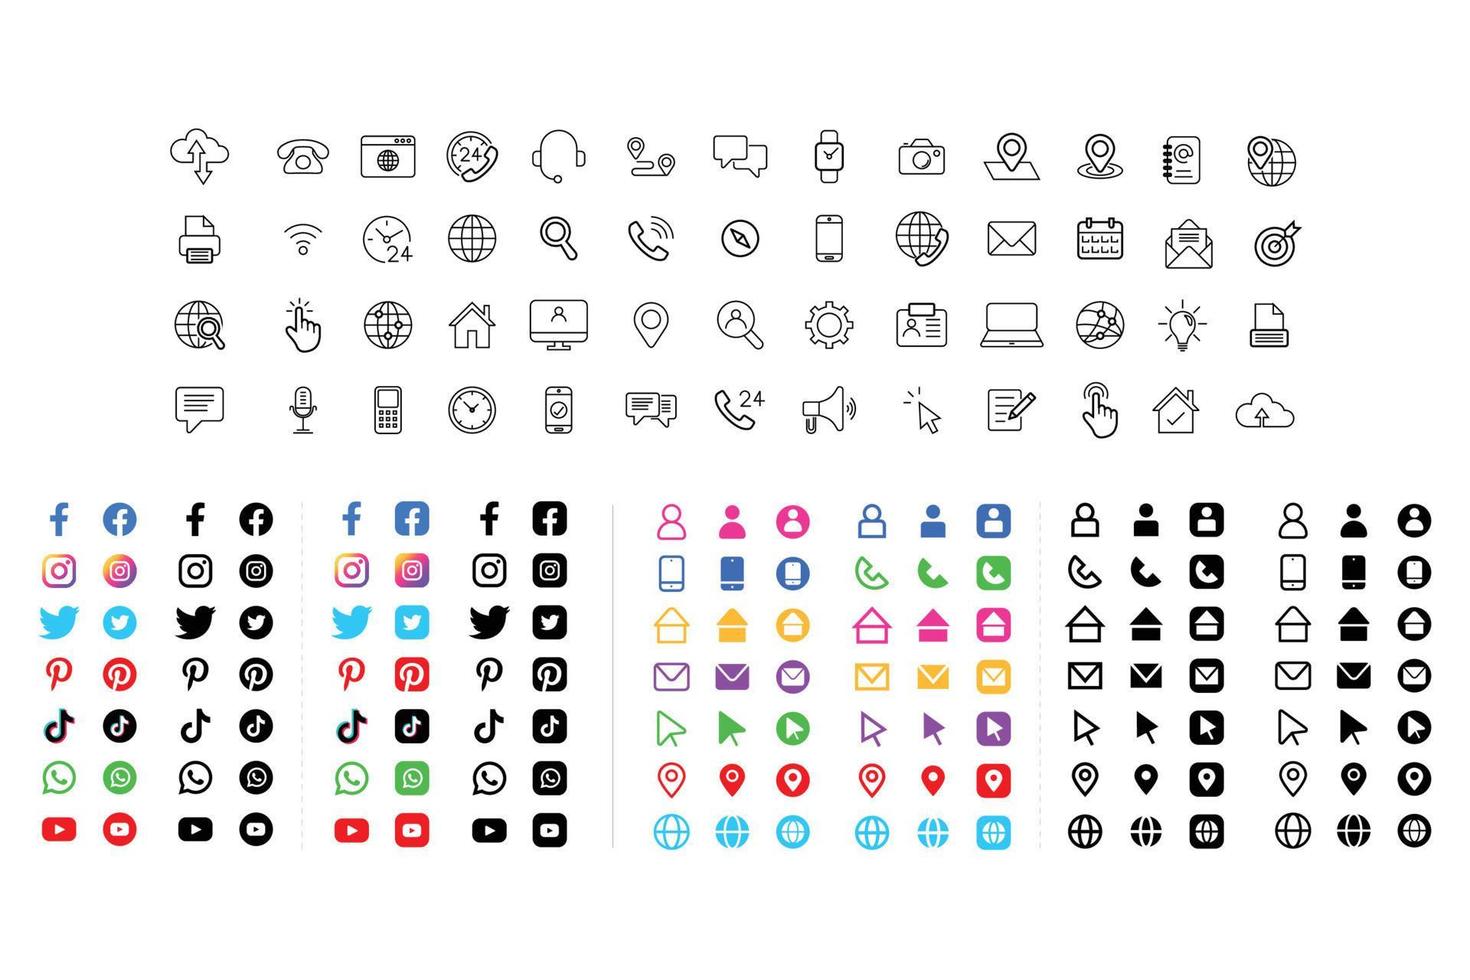 Icons and social media logo set for business cards. Vector icon collection.